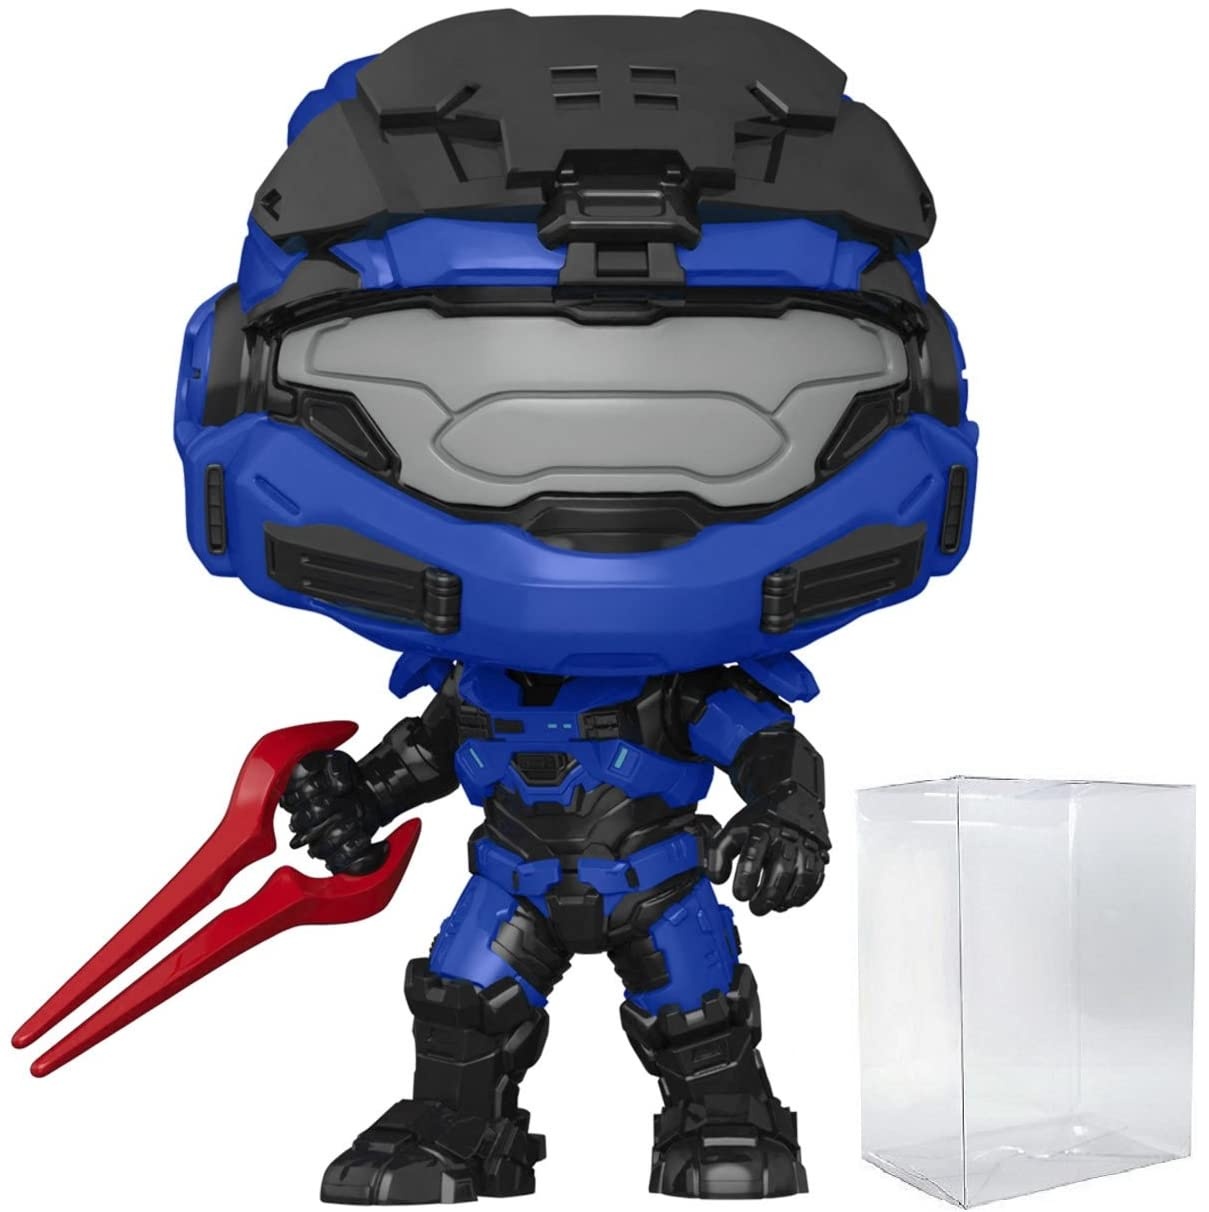 Halo Infinite - Spartan Mark V with Red Energy Sword Limited Edition Chase Funko Pop! Vinyl Figure (Bundled with Compatible Pop Box Protector Case)